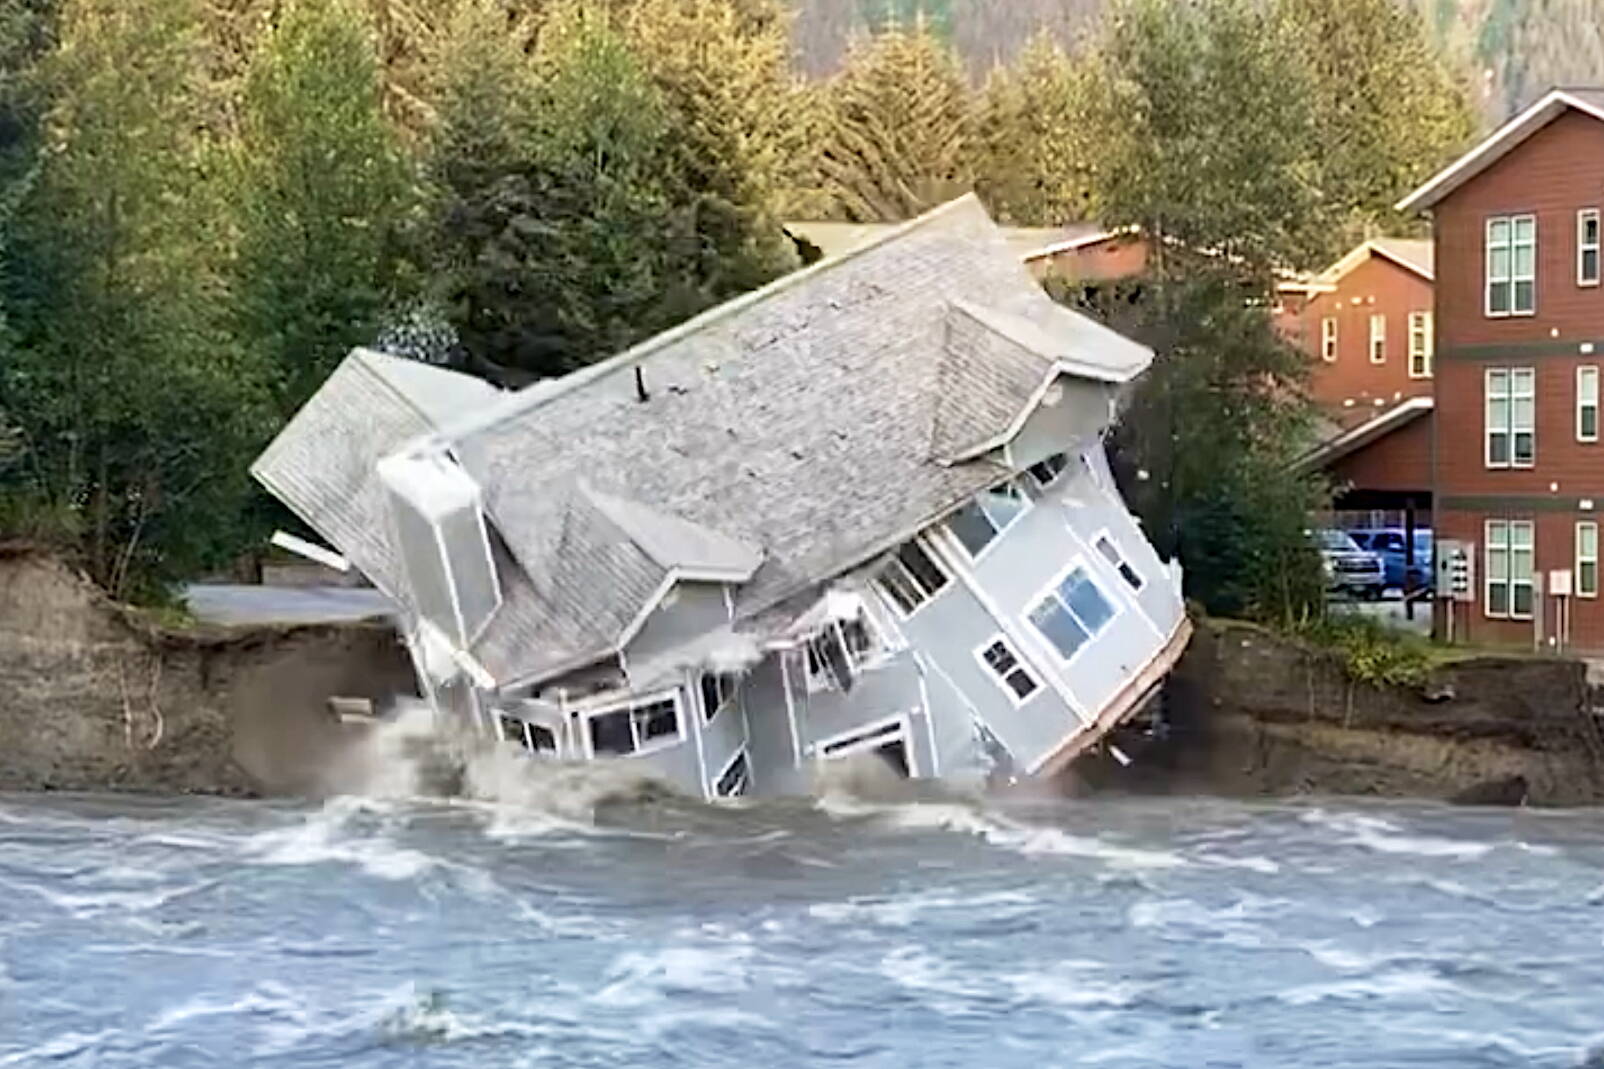 A home collapses into the Mendenhall River on Saturday due to a record amount of flooding from Suicide Basin since an annual cycle of water release began there in 2011. Officials said nobody was injured when the house collapsed, but other structures along the riverbank are at risk. (Screenshot from video by Sam Nolan)